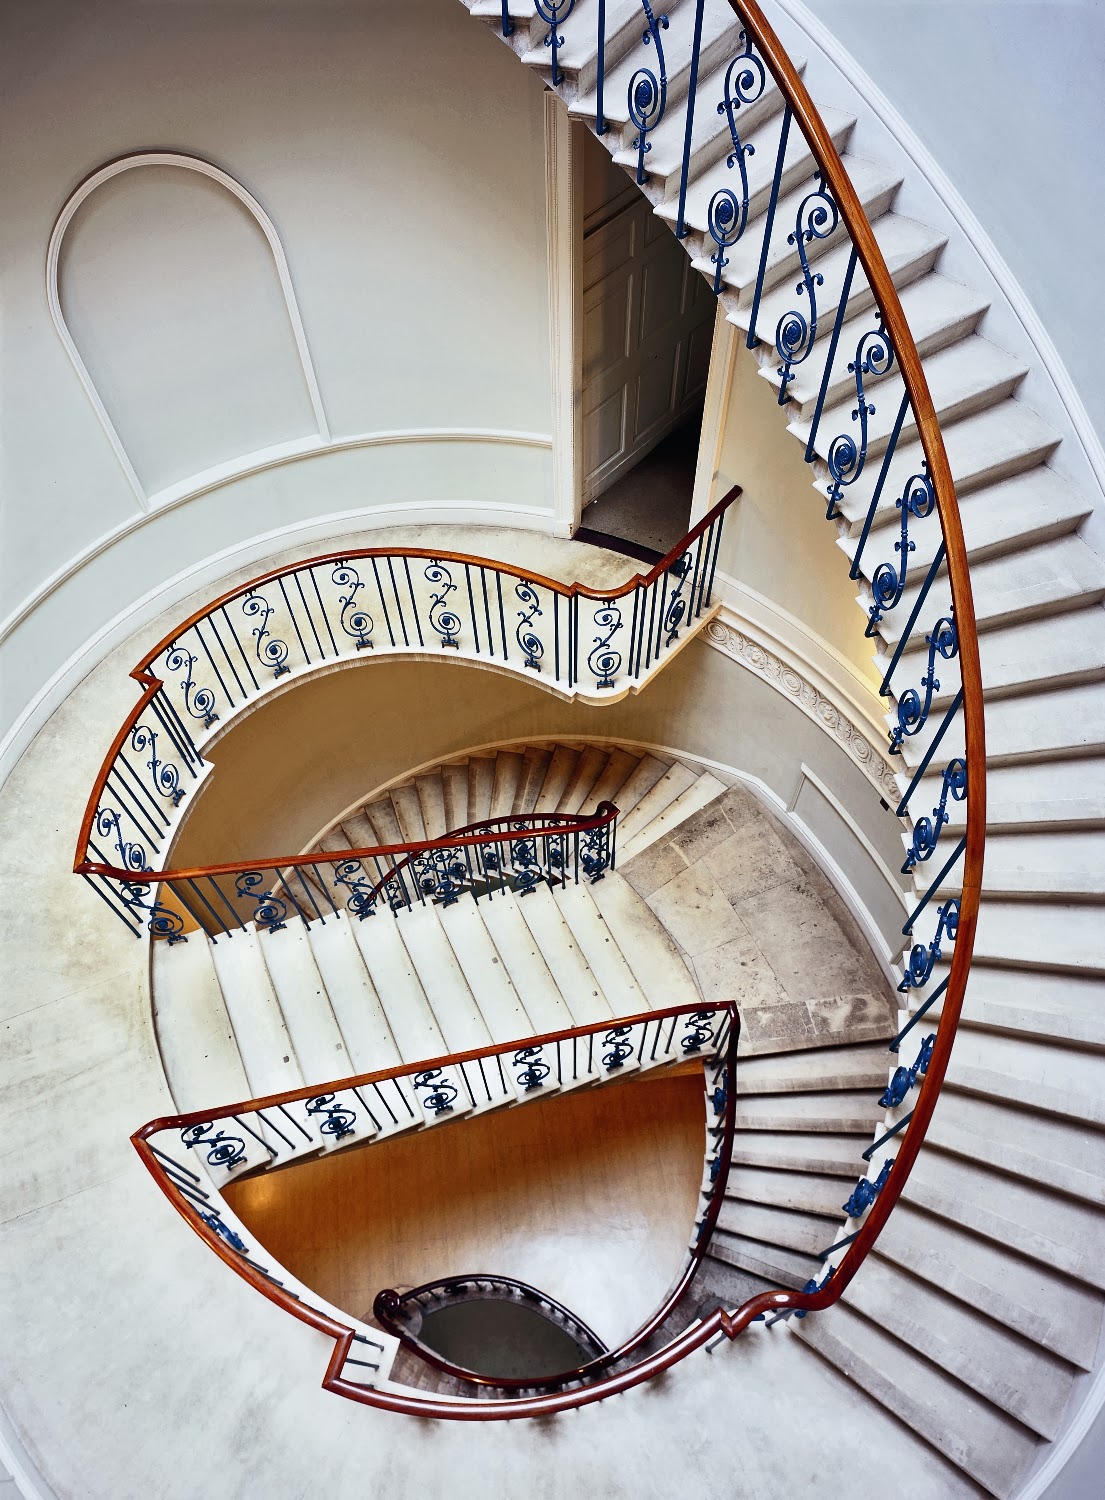 The Arts by Karena: Staircases: The Architecture of Ascent